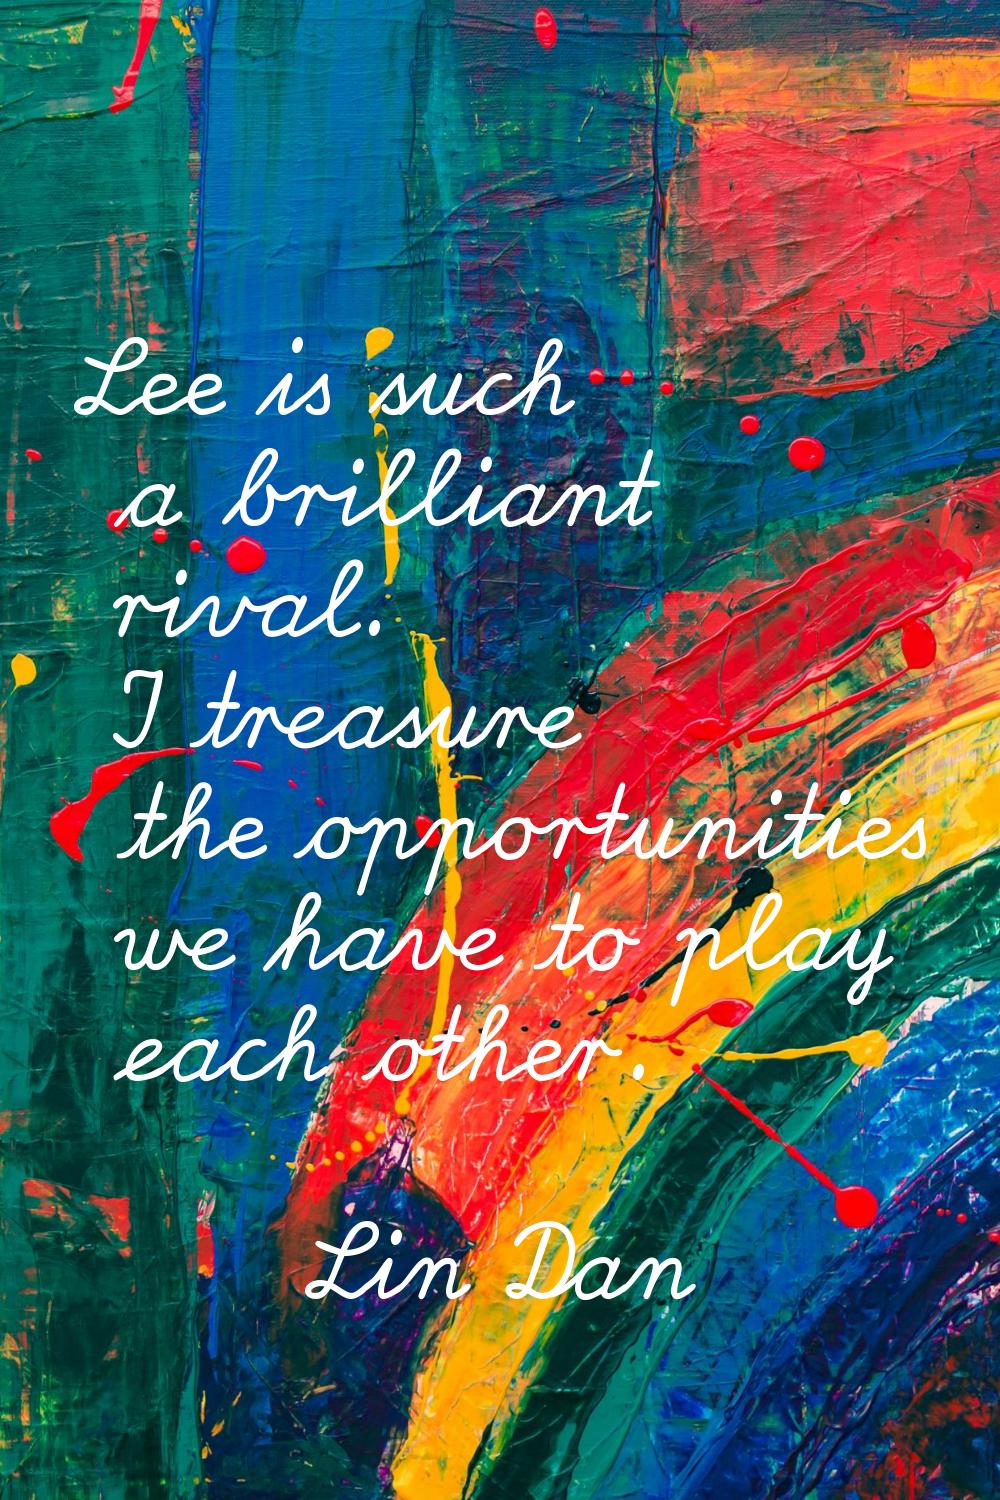 Lee is such a brilliant rival. I treasure the opportunities we have to play each other.